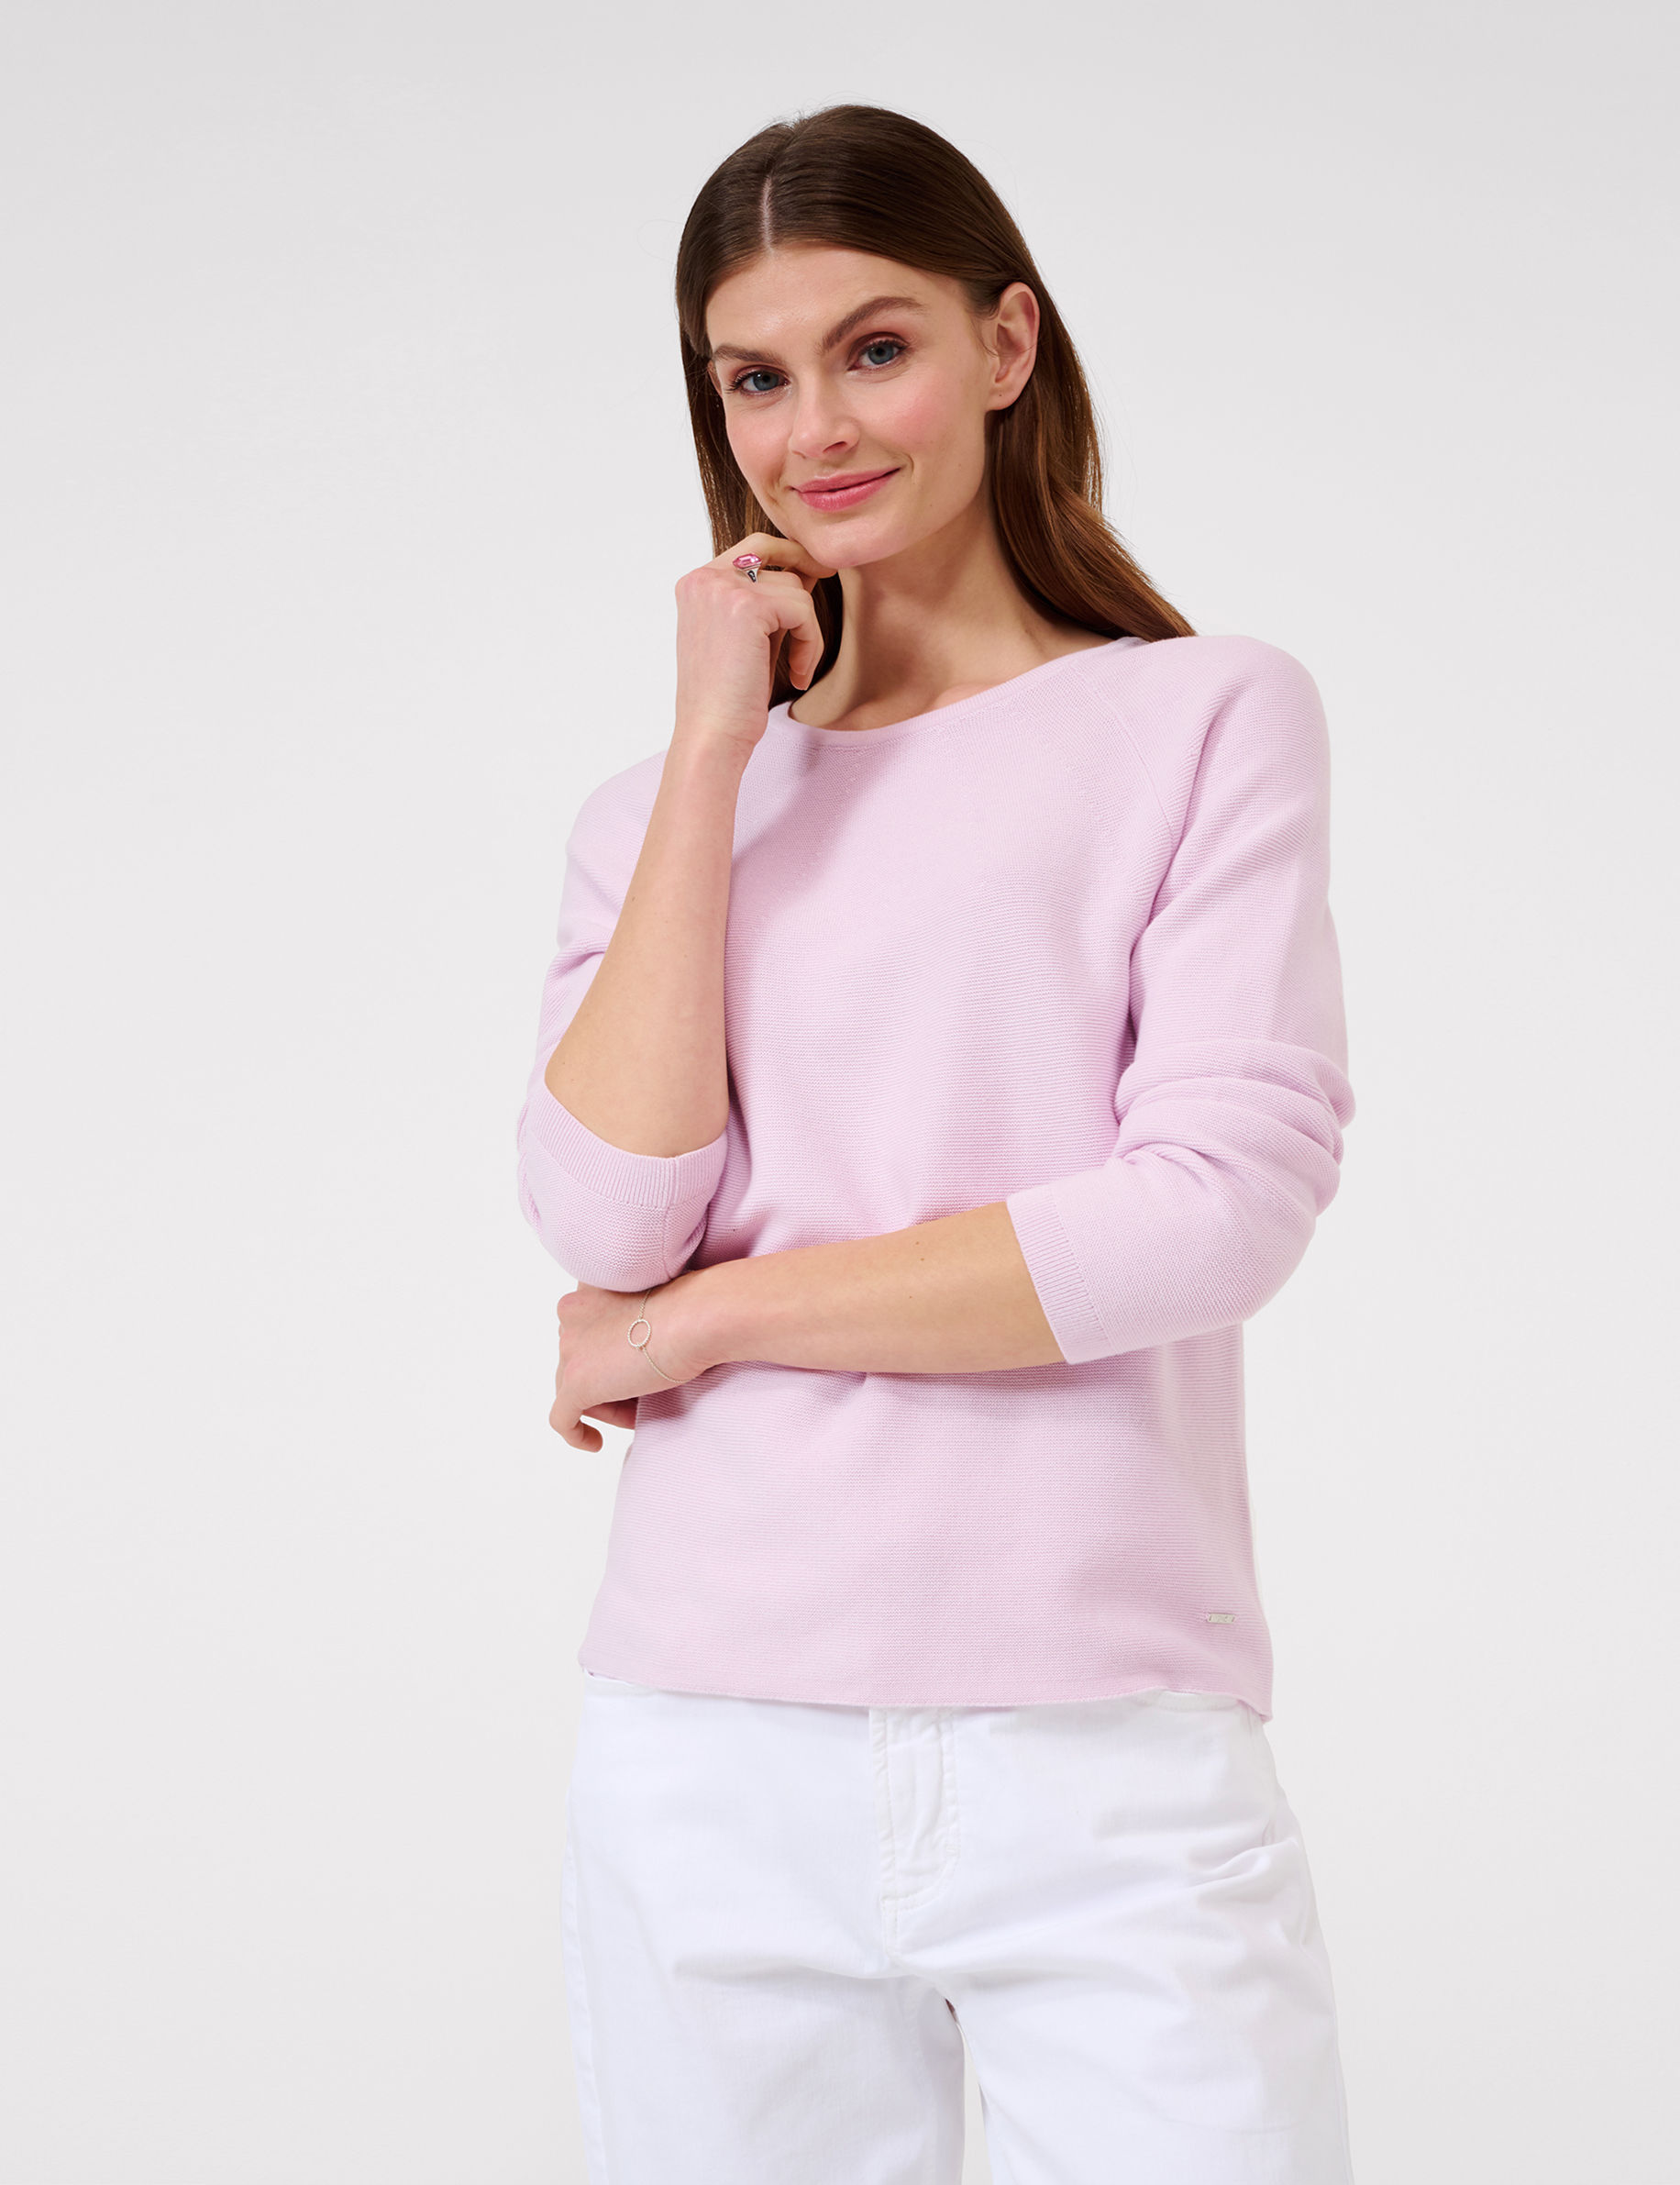 Shades of pink, Women, Style LESLEY, MODEL_FRONT_ISHOP